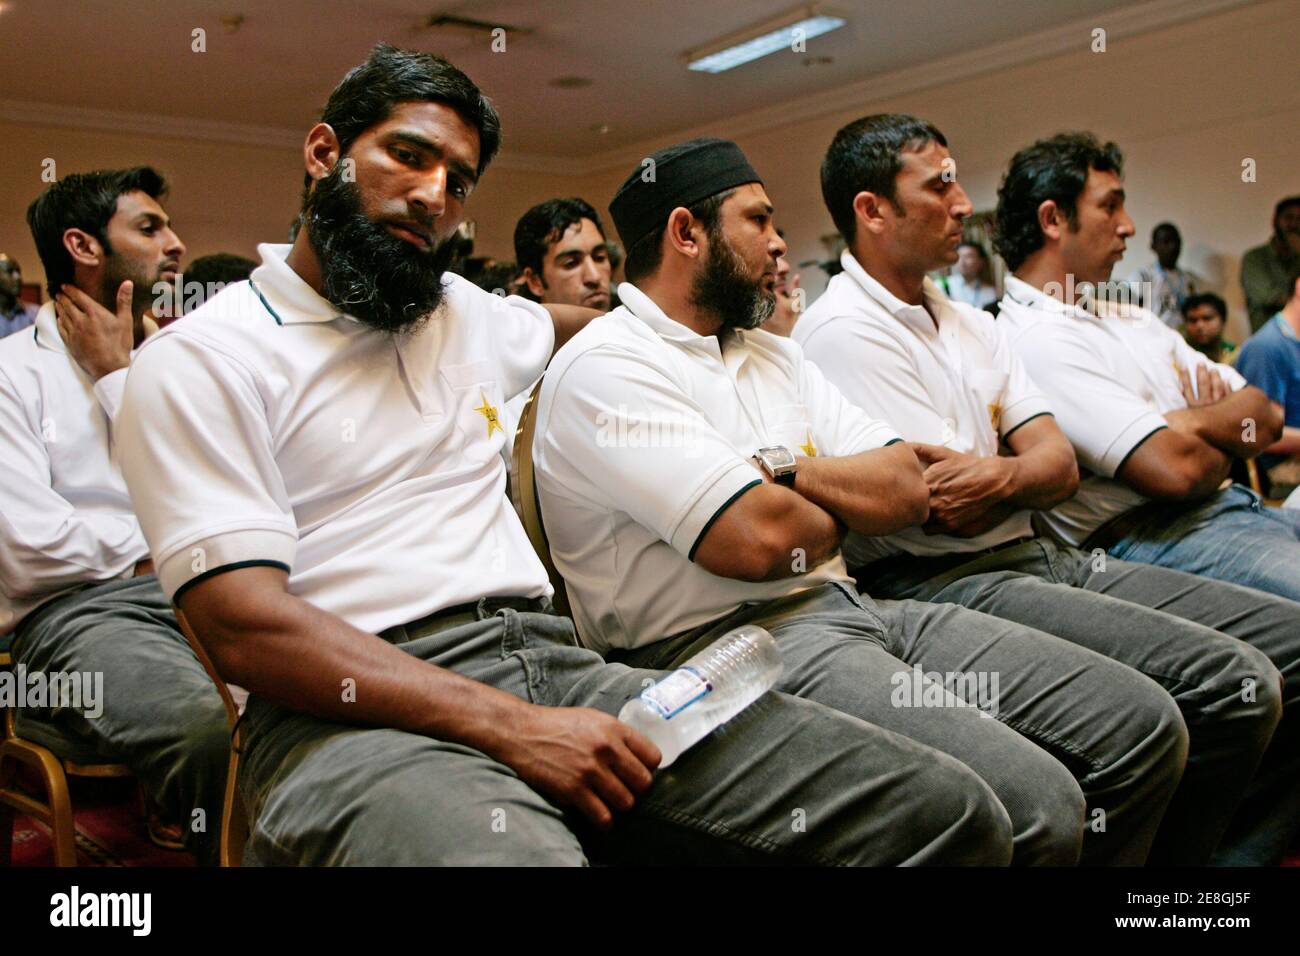 Members of the Pakistan team, including Mohammad Yousuf (L), Younis Khan (2nd R) and Azhar Mahmood (R) listen to team captain Insamam-ul-Haq during a news conference in Kingston March 18, 2007.  Inzamam-ul-Haq had planned to discuss his future with coach Bob Woolmer on Sunday and was left shattered by the Englishman's sudden death following the team's shock World Cup exit.   REUTERS/Andy Clark   (JAMAICA) Stock Photo